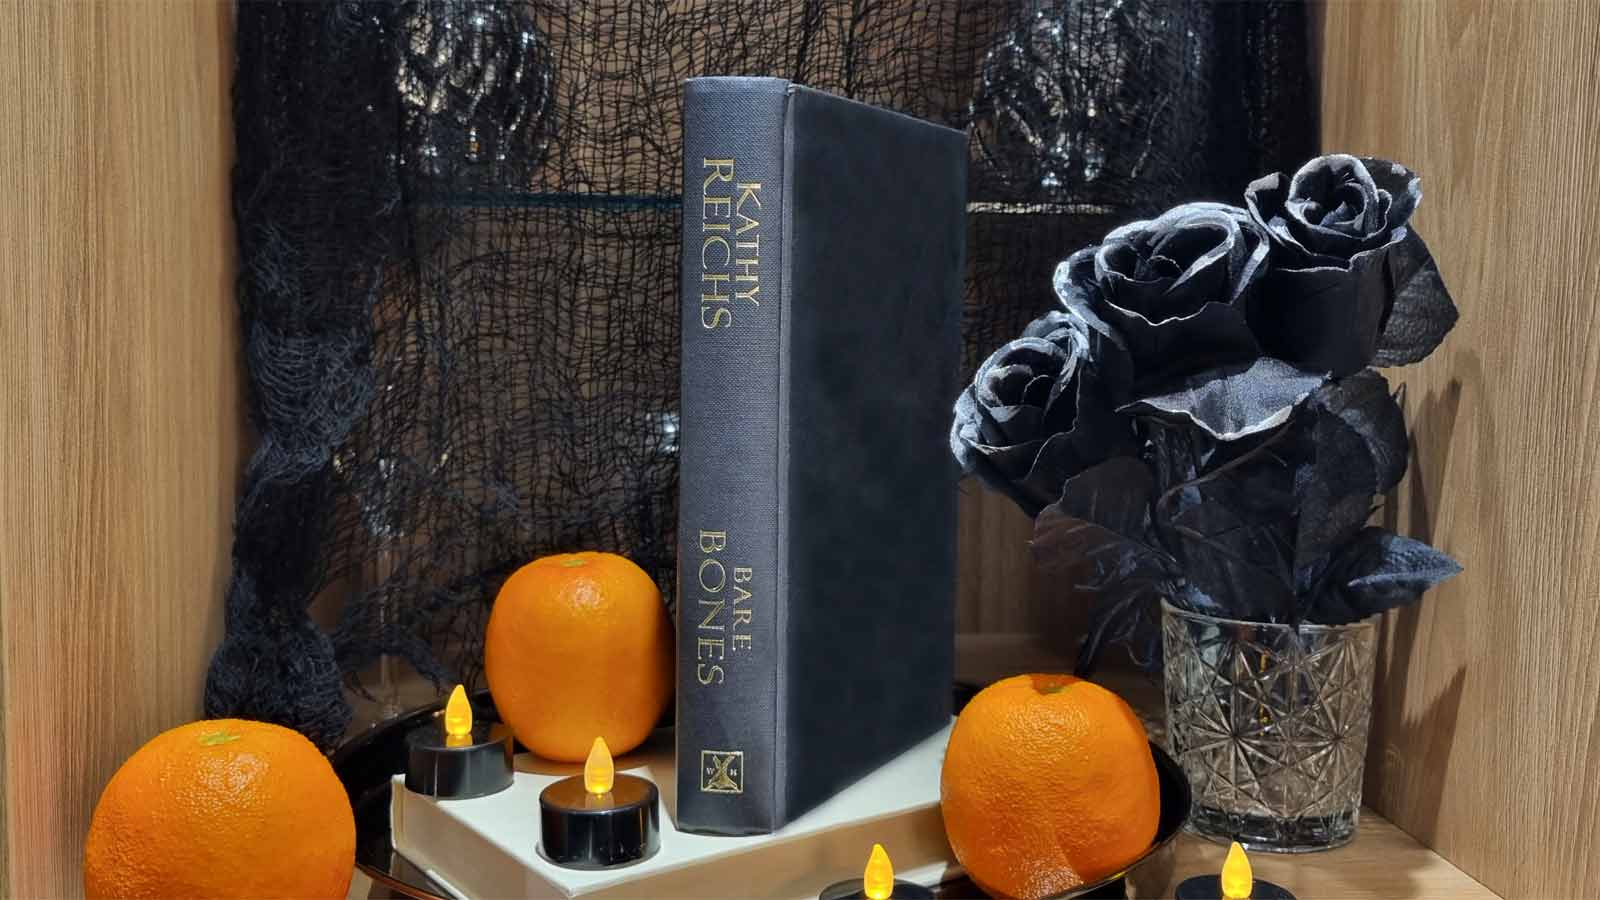 A thriller book amidst festive Halloween black roses and orange props